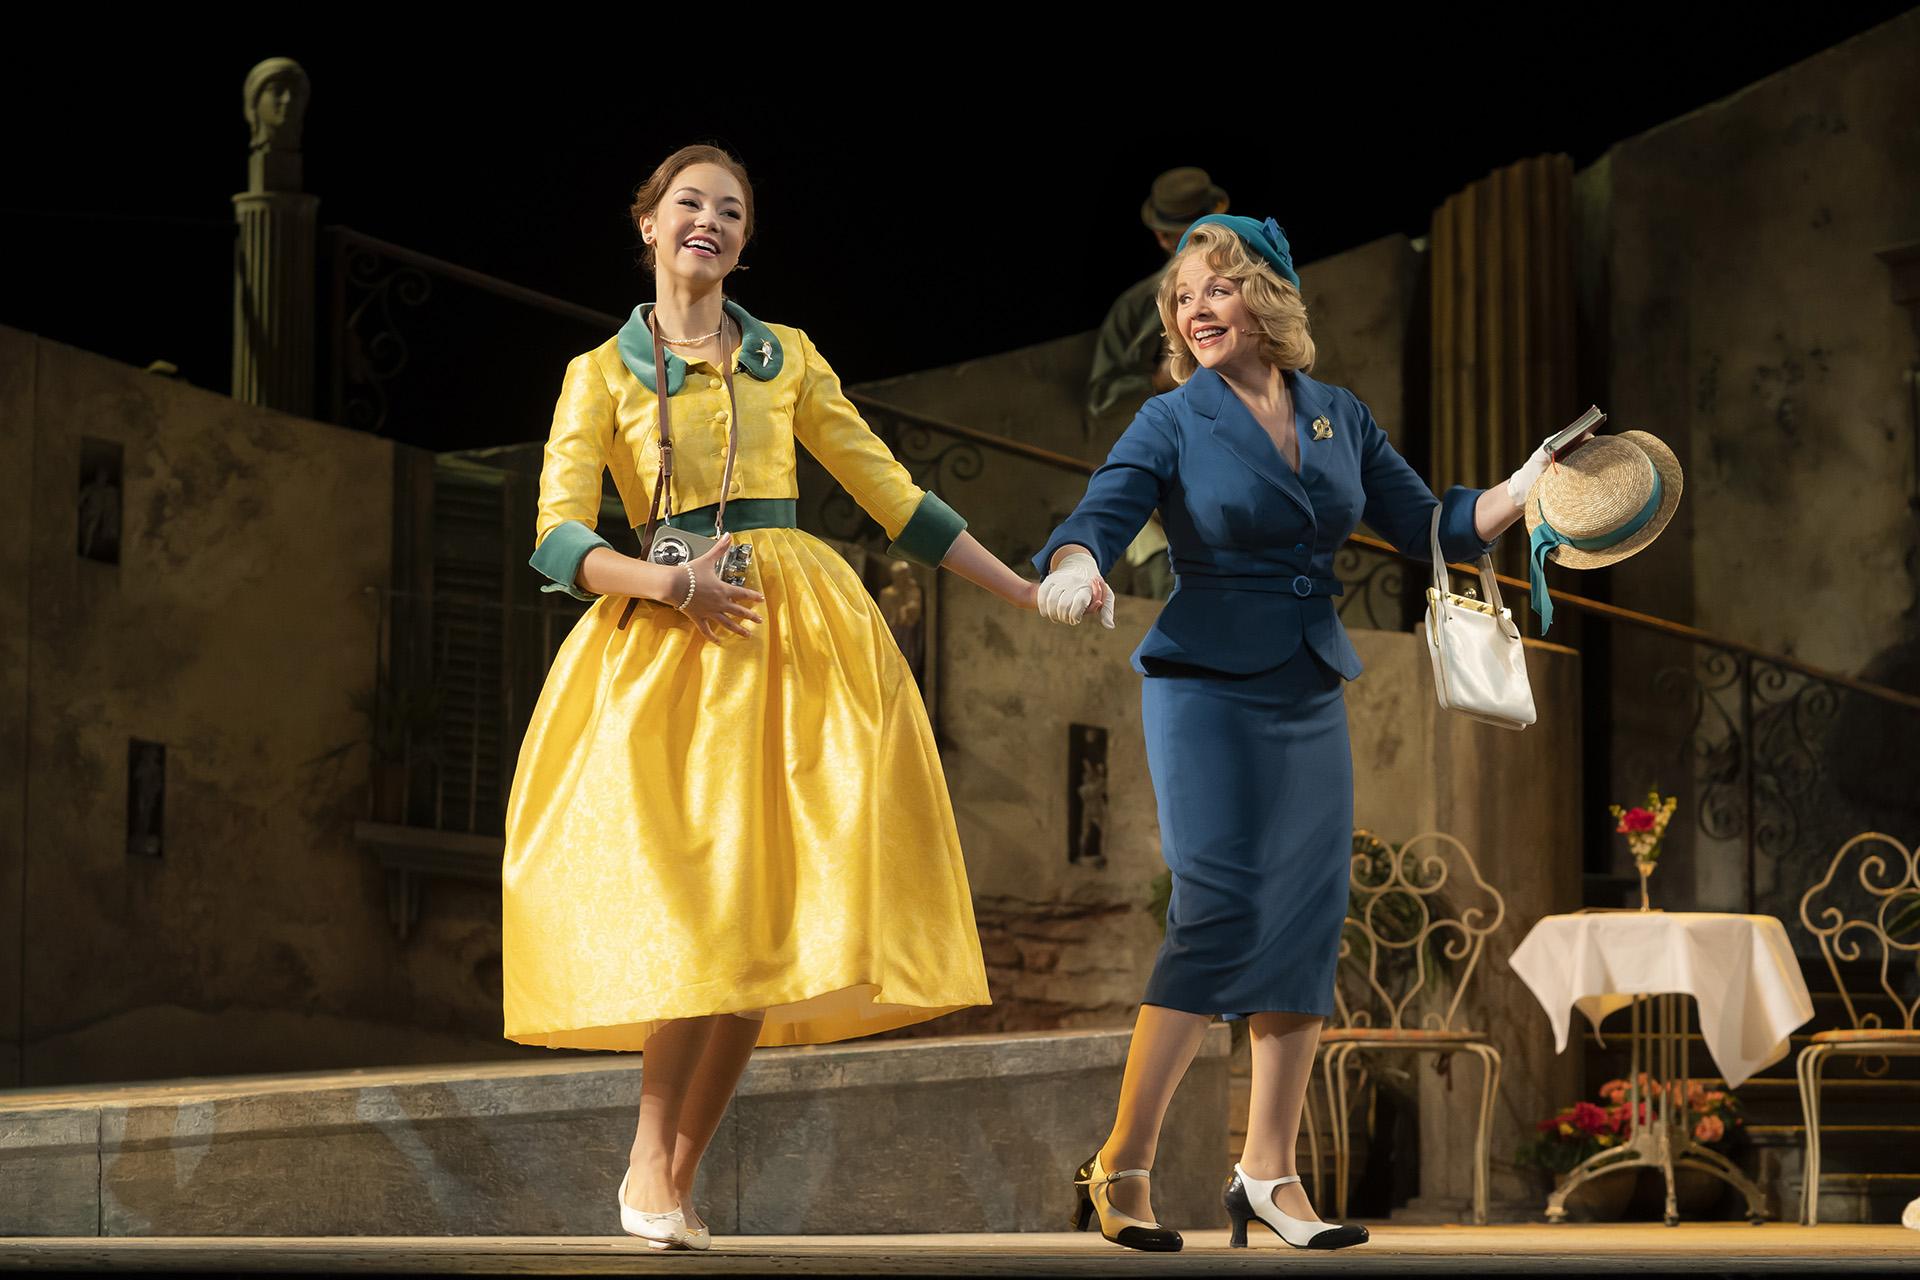 Solea Pfeiffer and Renée Fleming in the “The Light in the Piazza” at Lyric Opera House. (Photo by Liz Lauren)